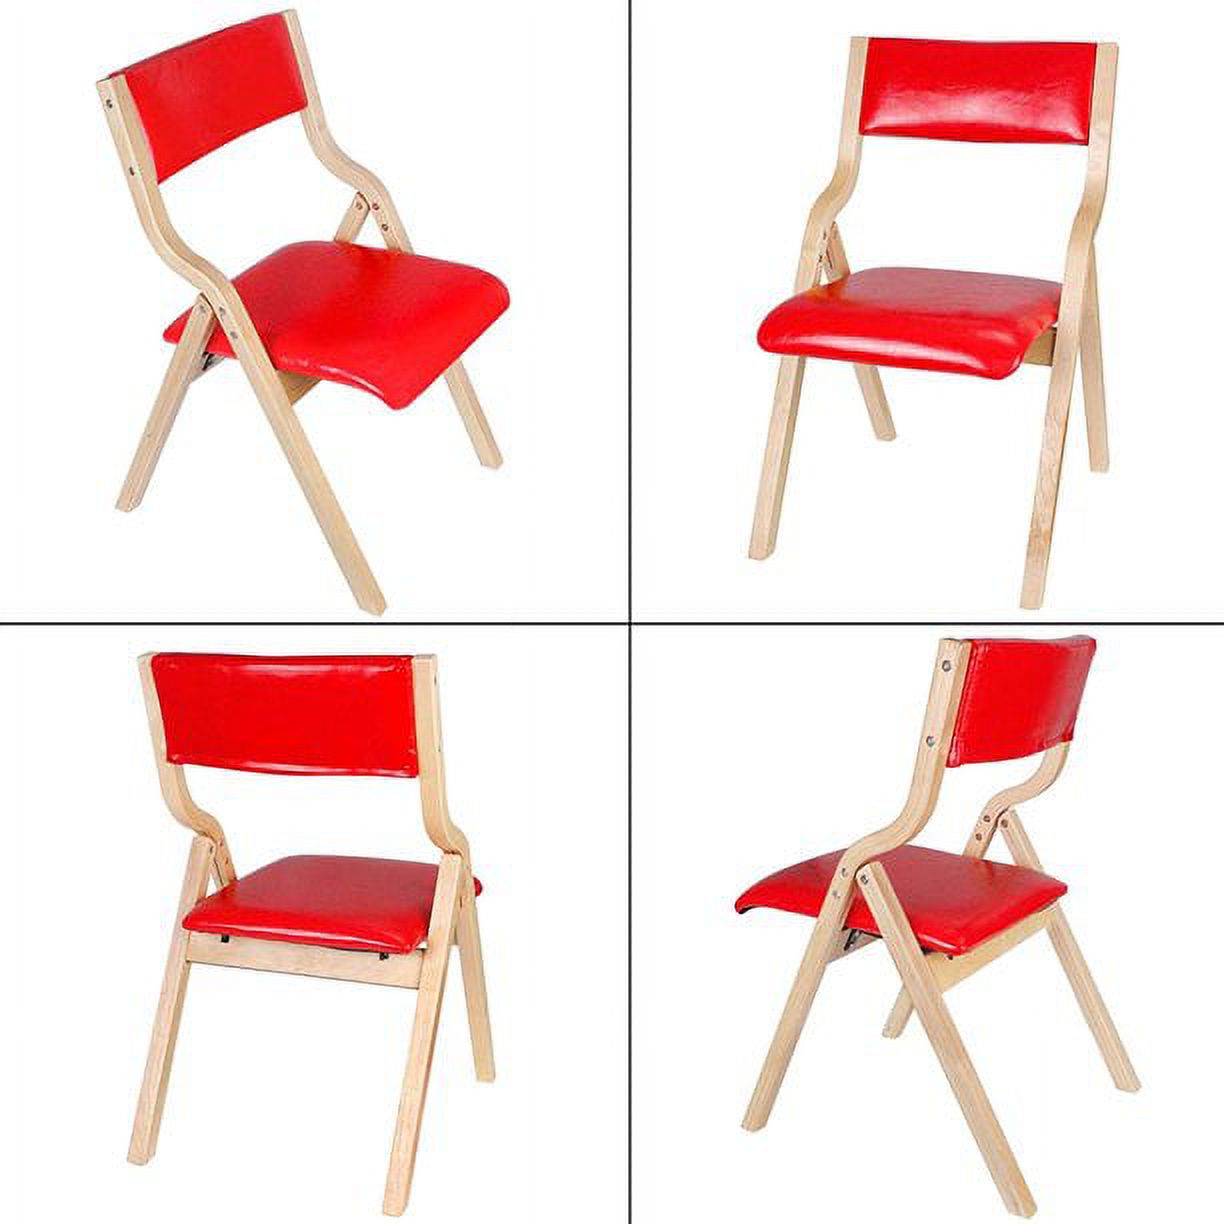 Natural Beechwood Solid Wood Folding Chair Armless with Vinyl Padded Seat Back for Home Dining Desk 4Set Red - image 1 of 8